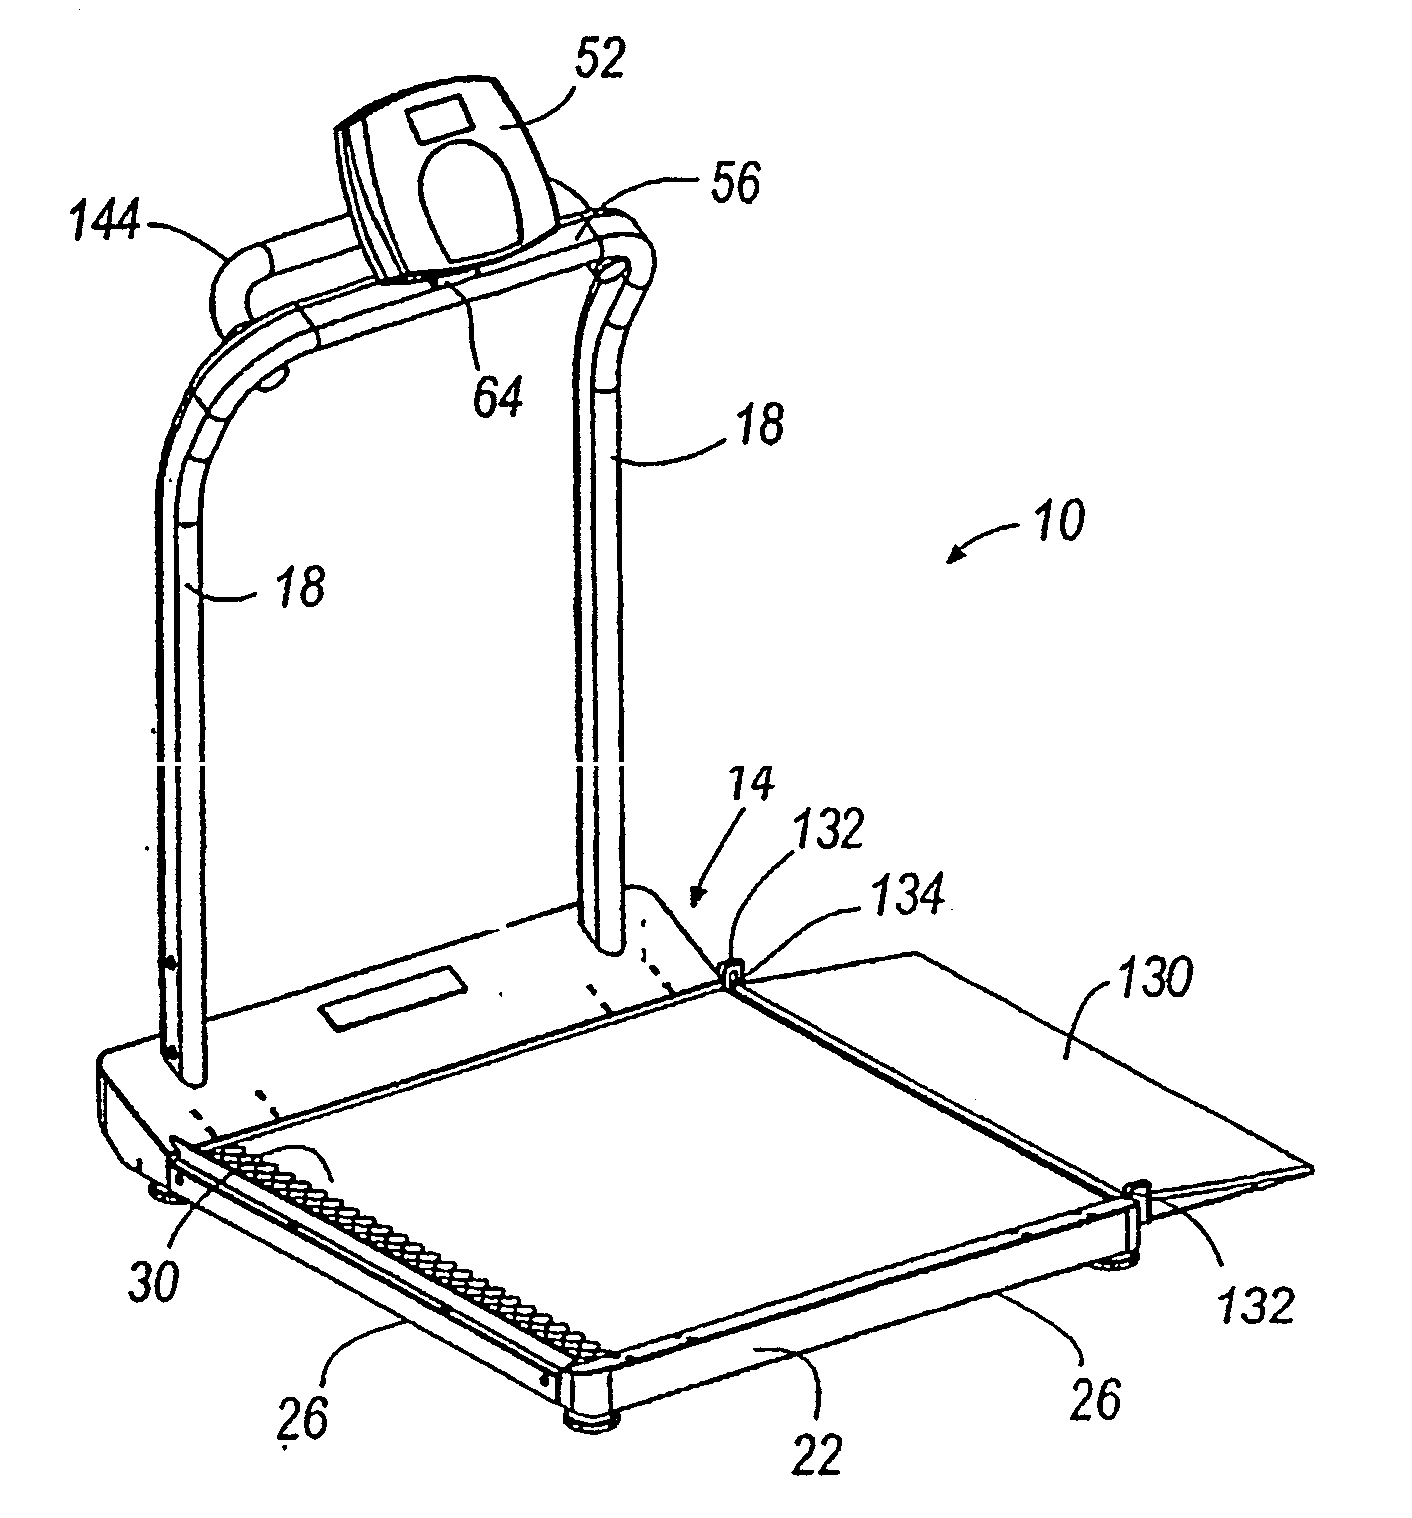 Measuring device, such as a scale or medical scale